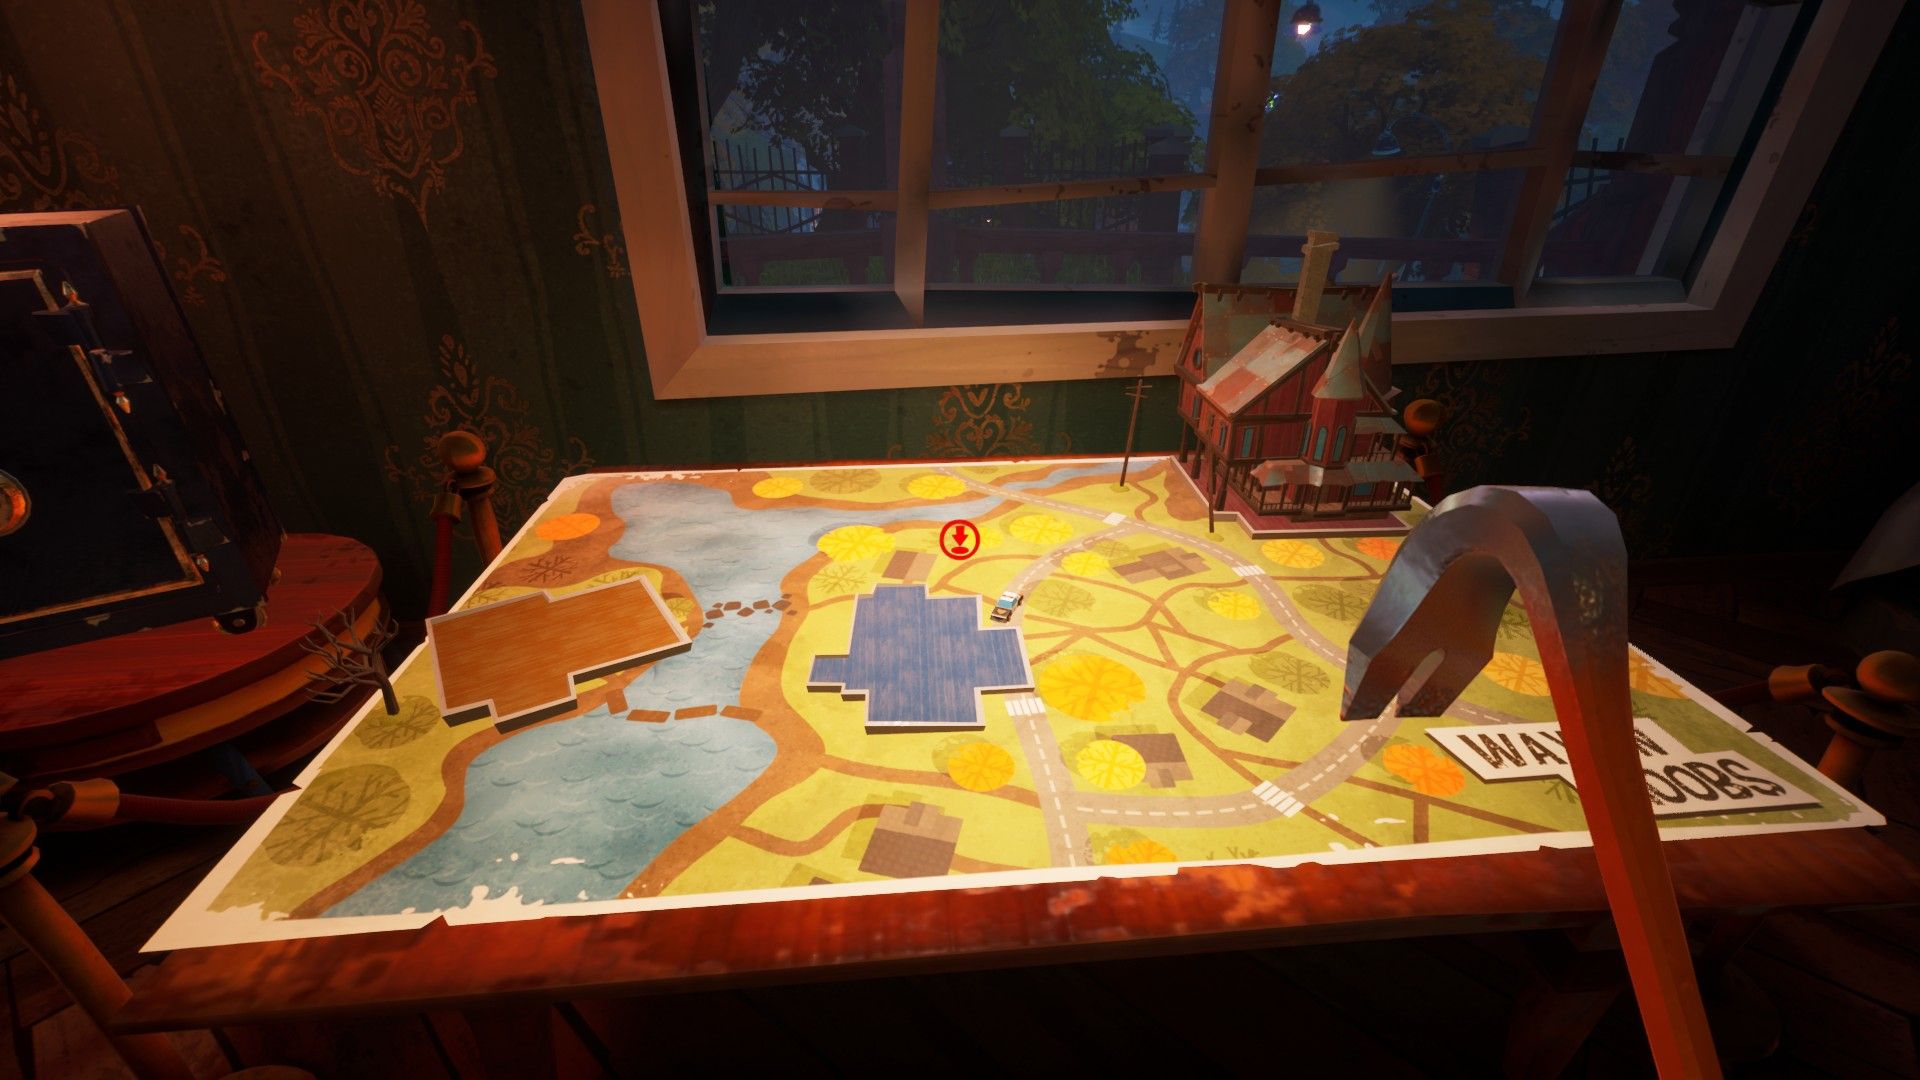 The model house puzzle you need to solve to progress through the museum in Hello Neighbor 2